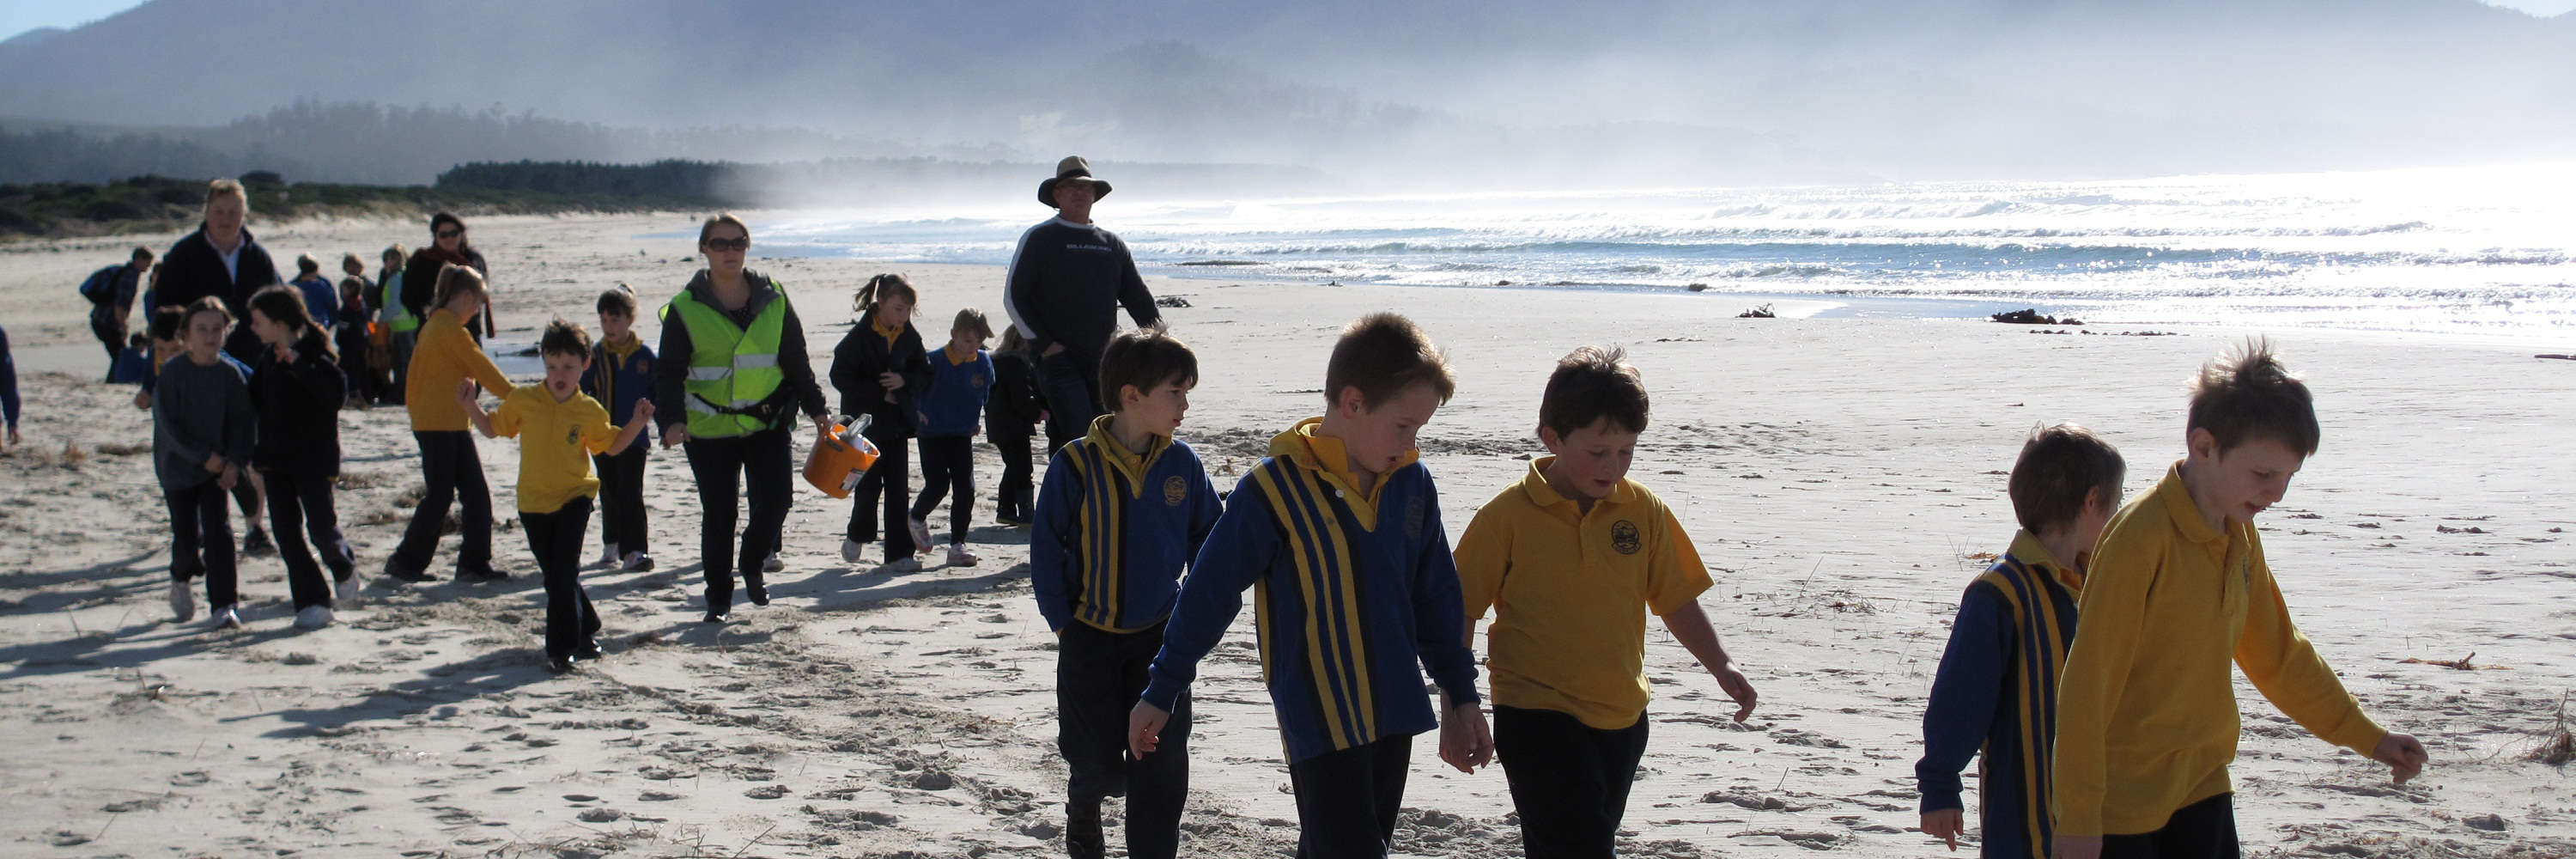 A line of young students and teachers walk along a white sandy beach with sunlit haze and mountains behind. Photo: Andrew Hughes.